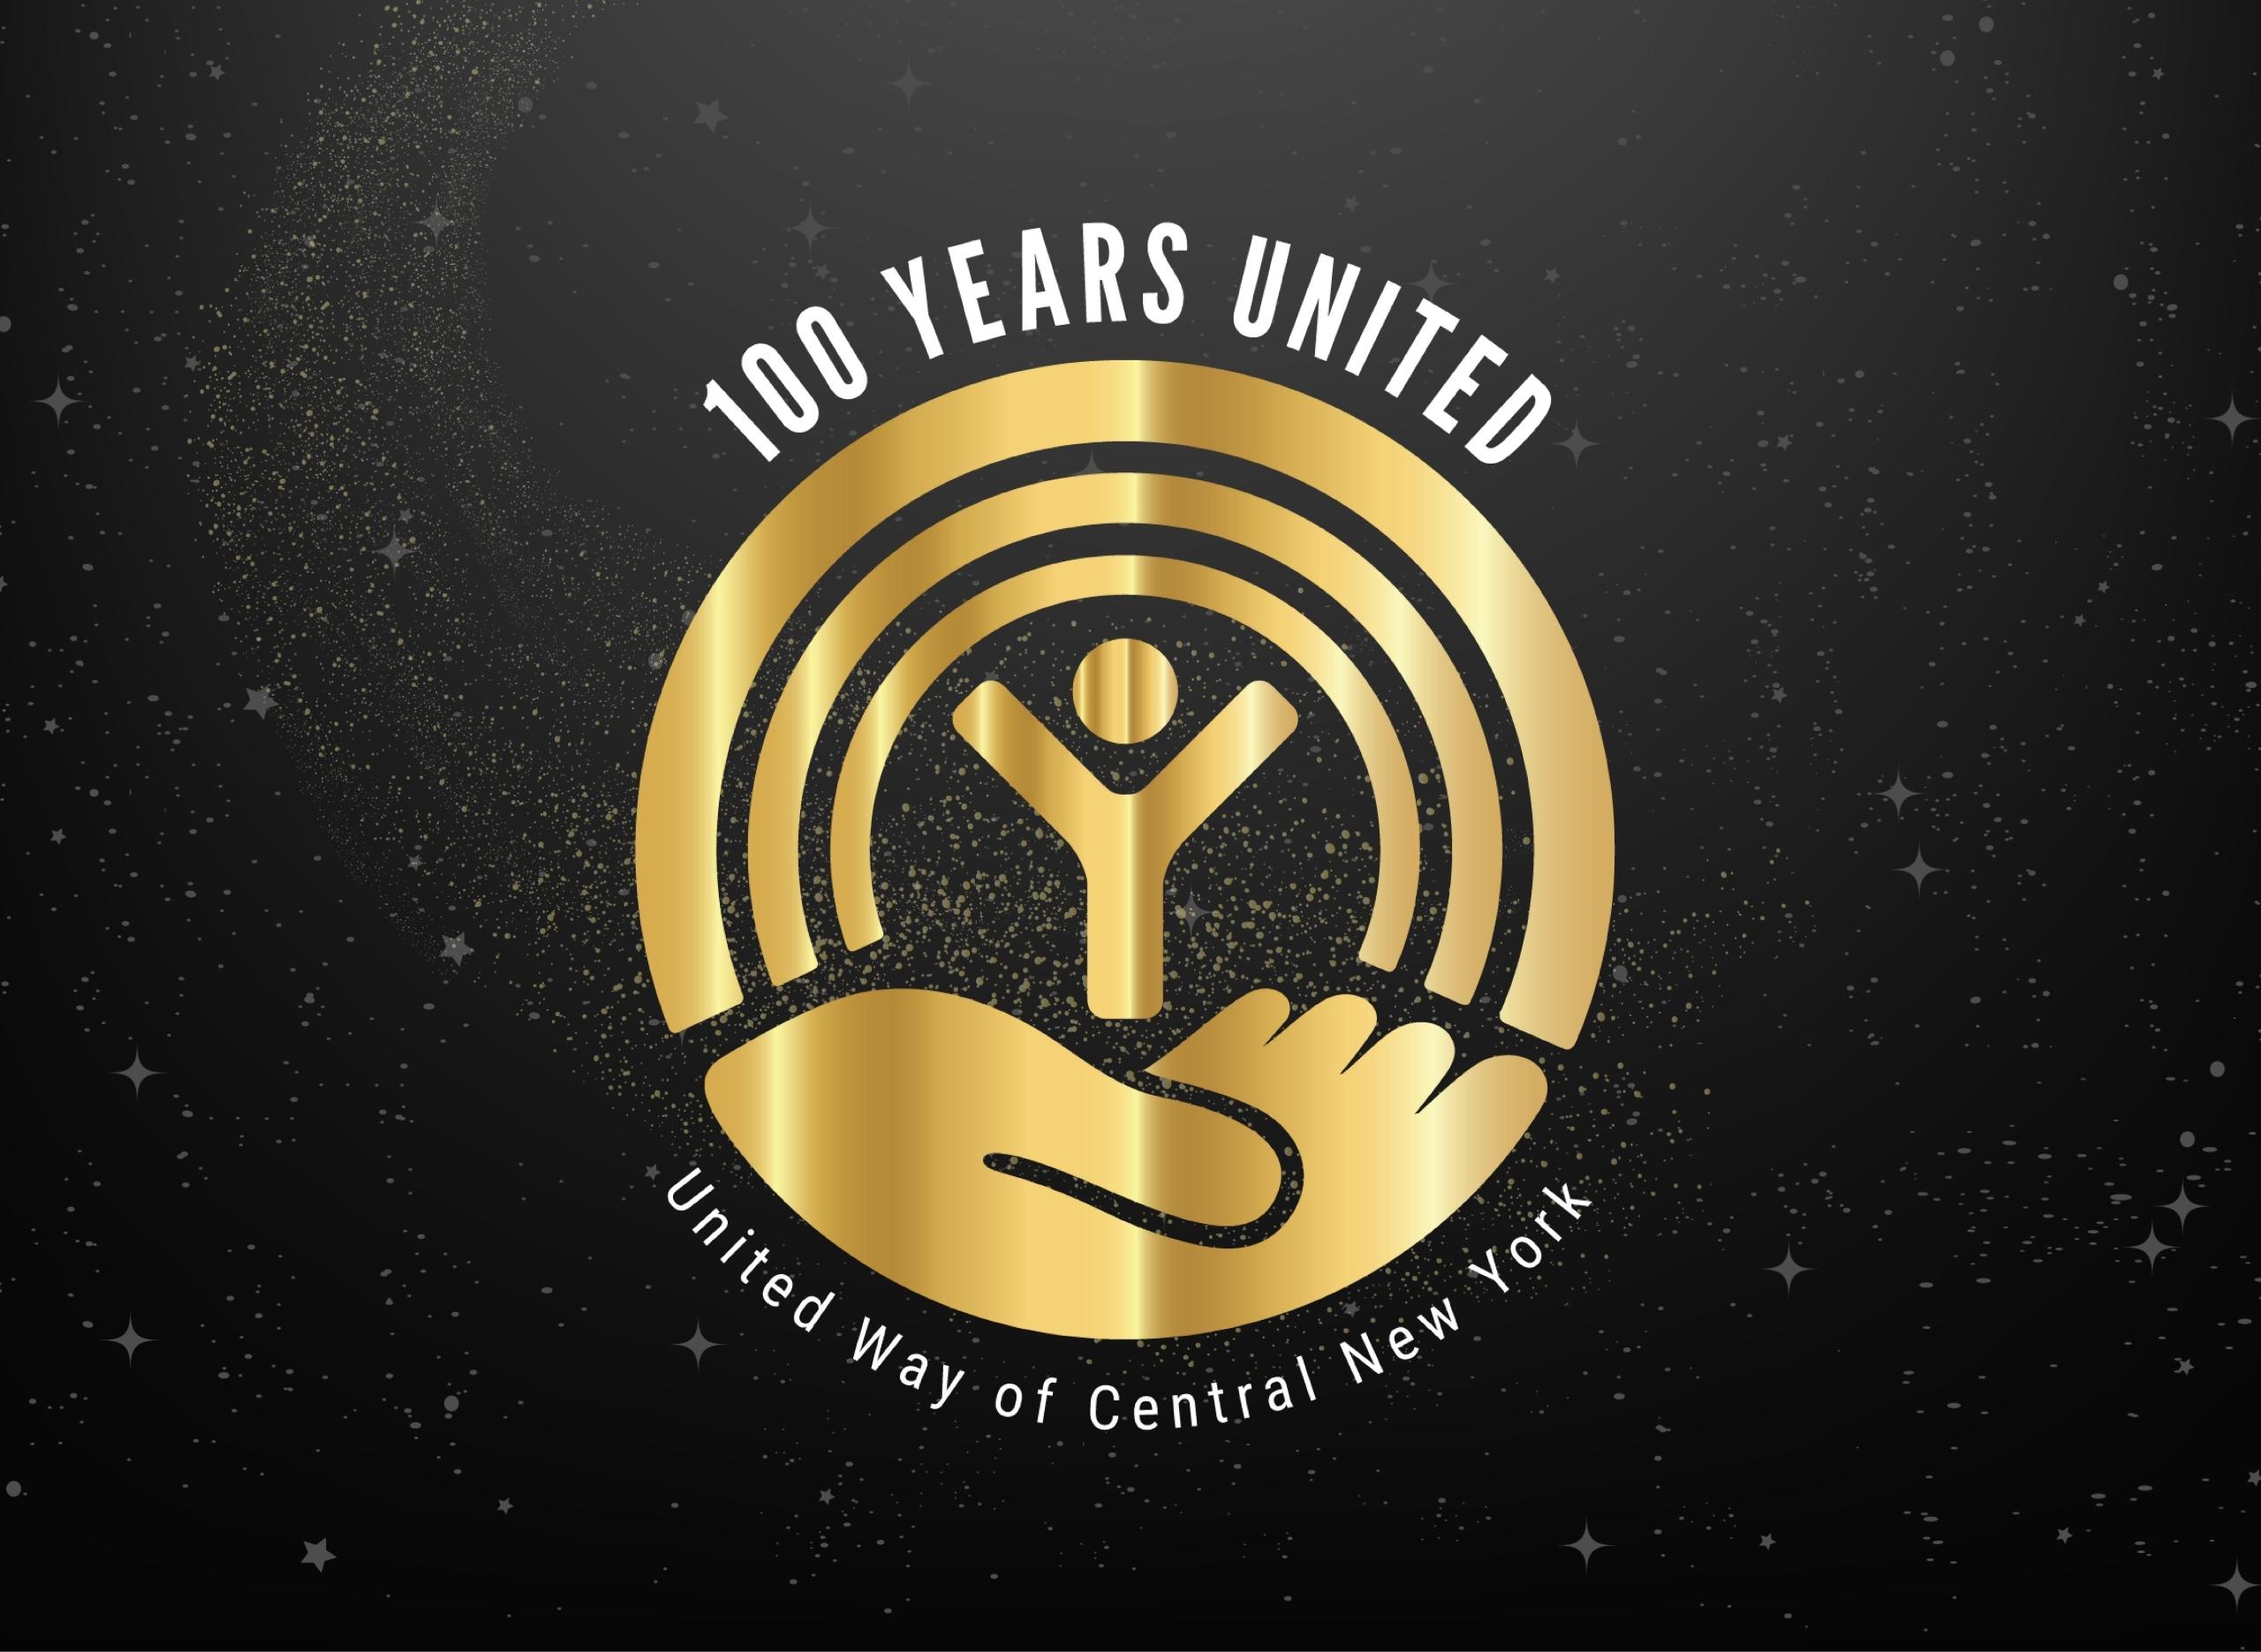 United Way of Central New York 100th Anniversary Gala